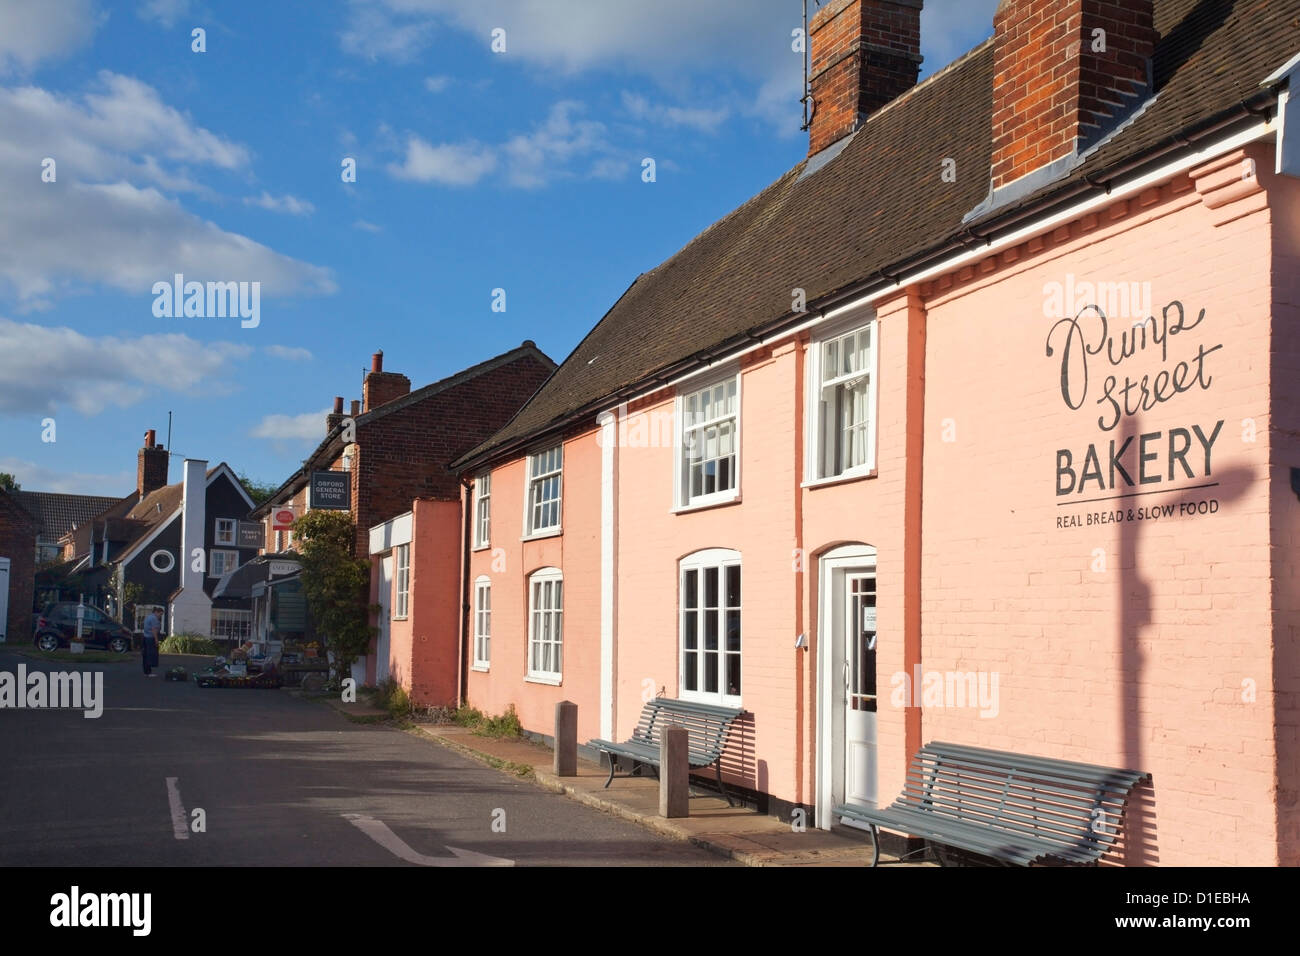 Bakery in a Suffolk Pink building on Pump Street, Orford, Suffolk, England, United Kingdom, Europe Stock Photo